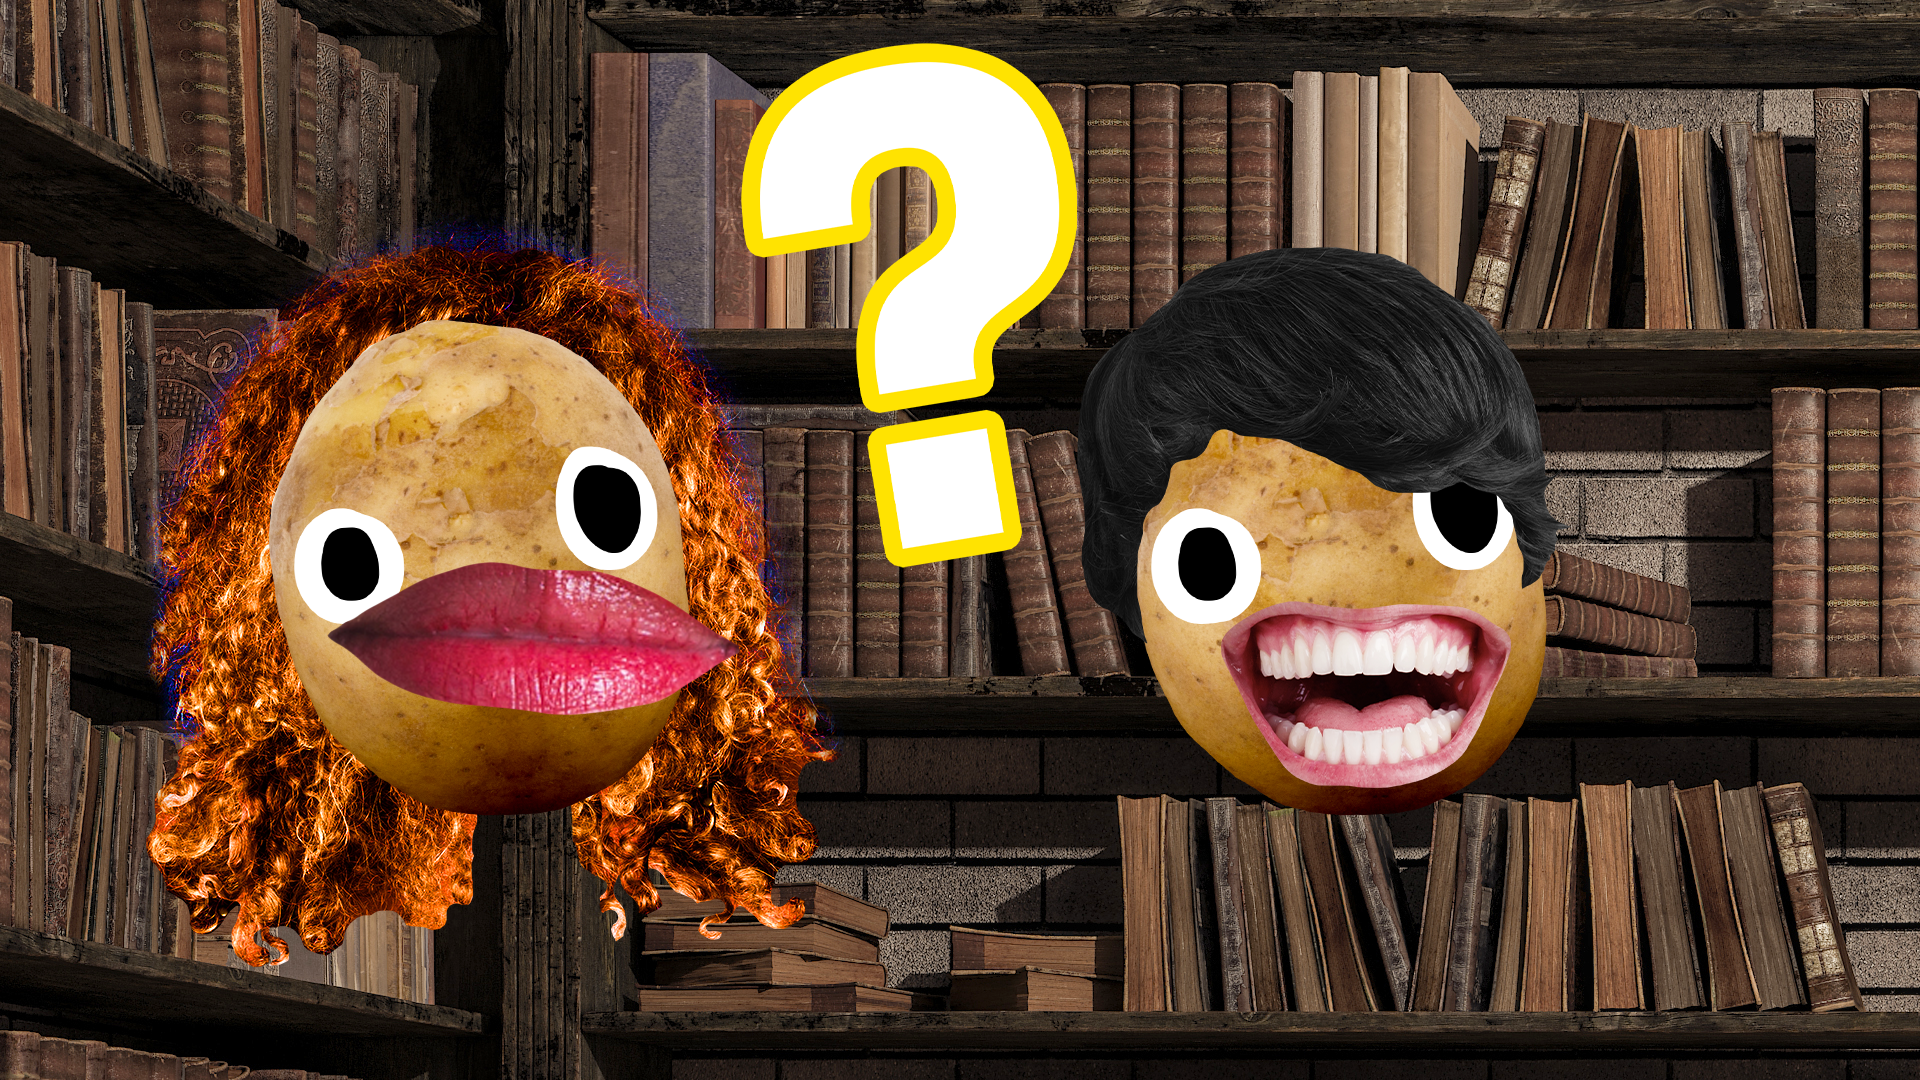 Ginny and Neville potatoes with question mark on library background